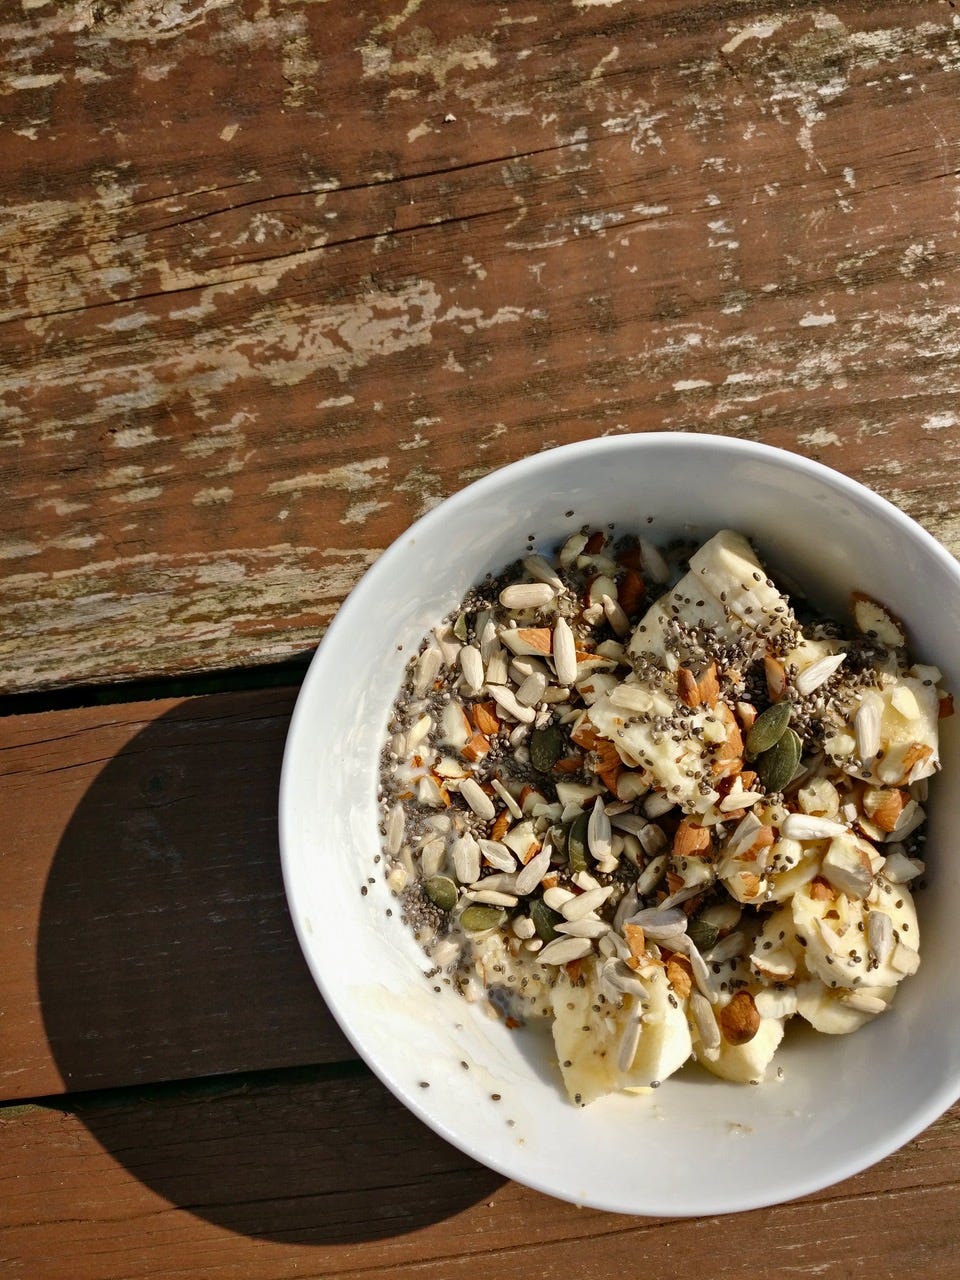 a bowl of oatmeal with bananas, nuts, and seeds on a wooden table in the sun